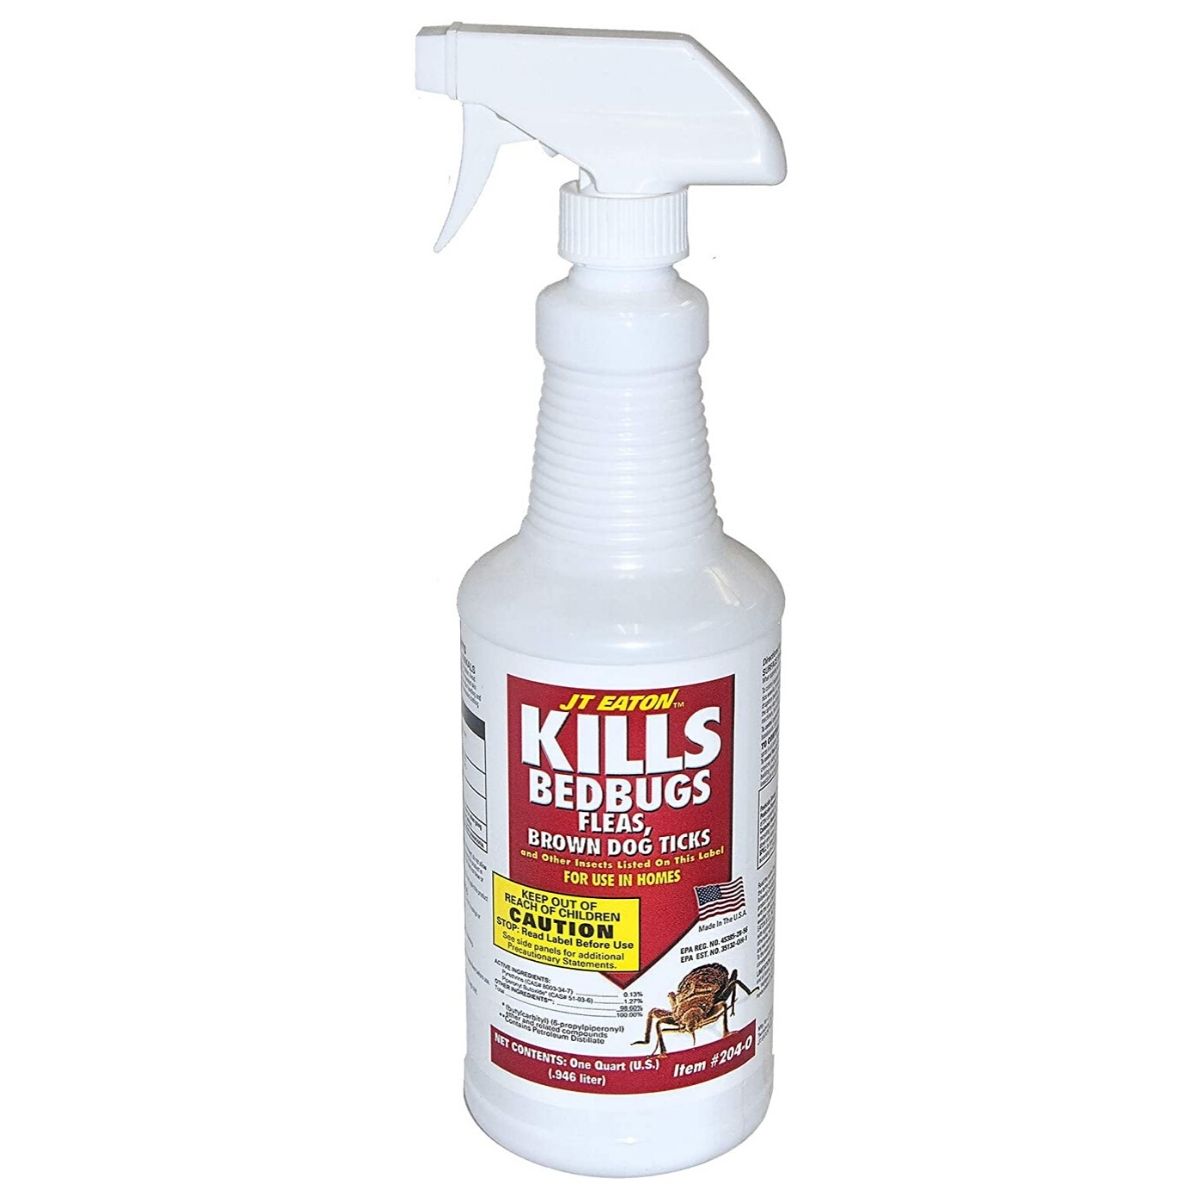 JT Eaton Non-Staining Oil-Based Bed Bug Spray